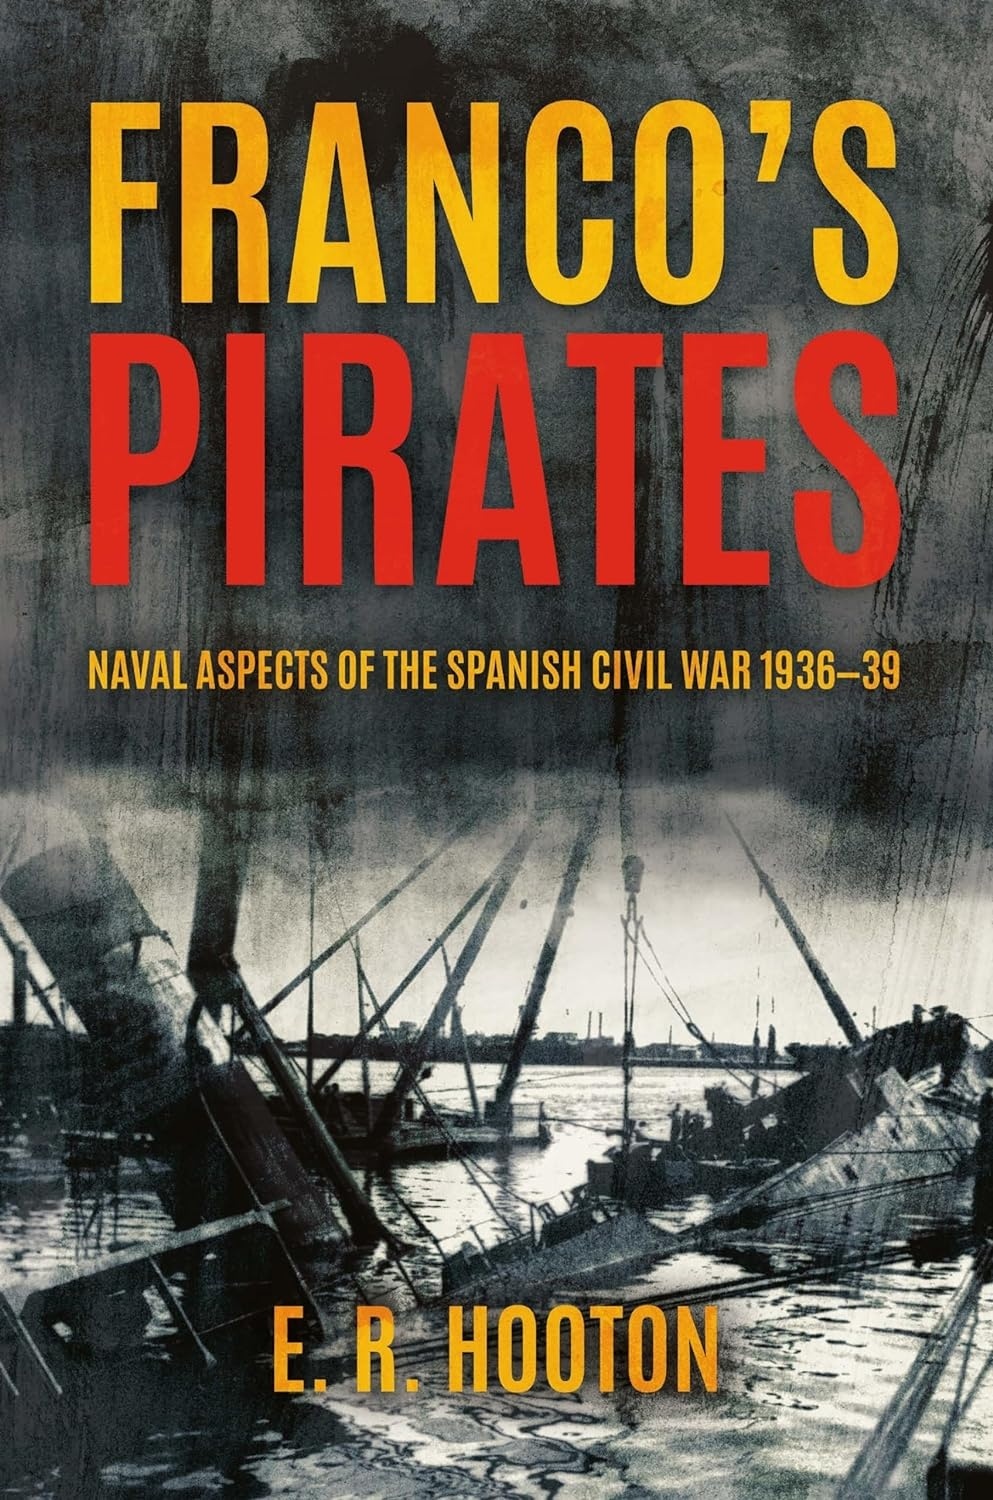 Franco'S Pirates: Naval Aspects of the Spanish Civil War 1936 1939  to  Naval Aspects of the Spanish Civil War 1